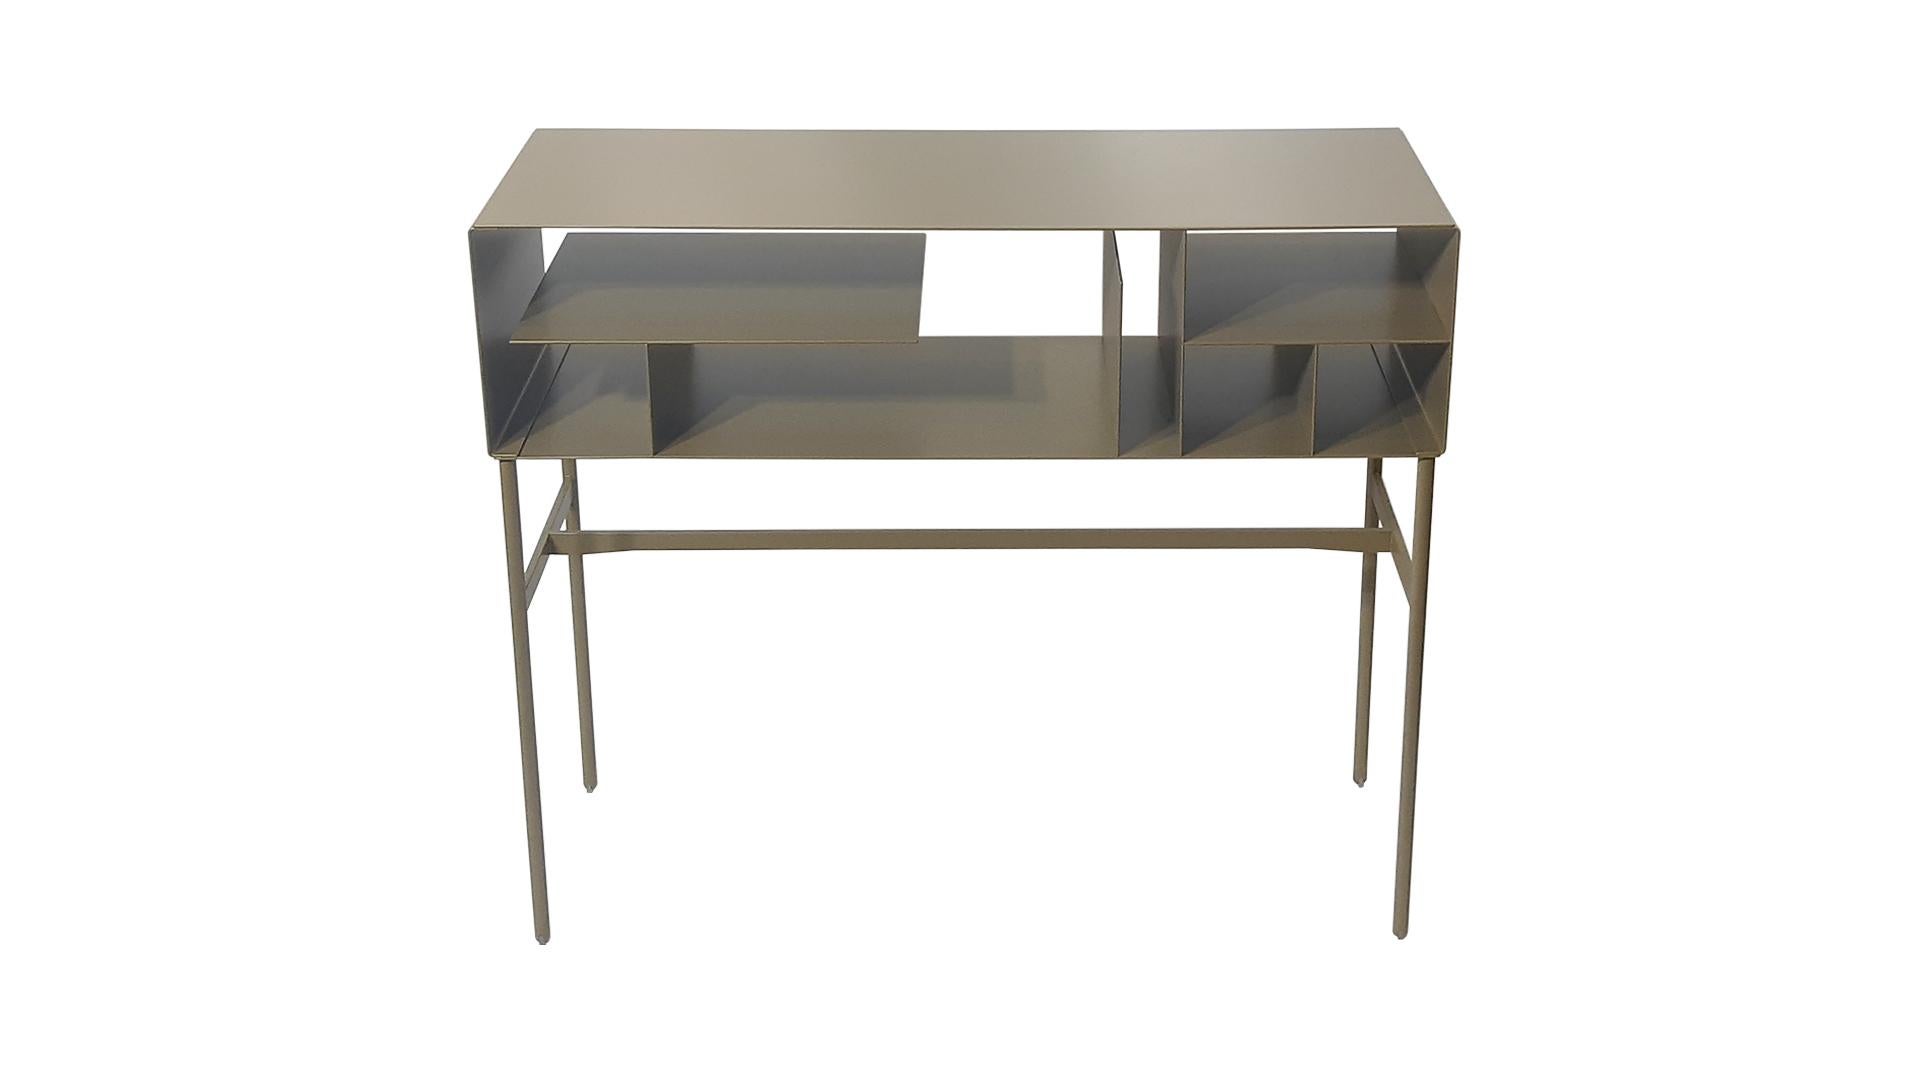 Hand-Crafted Italian Contemporary Steel Consolle, 